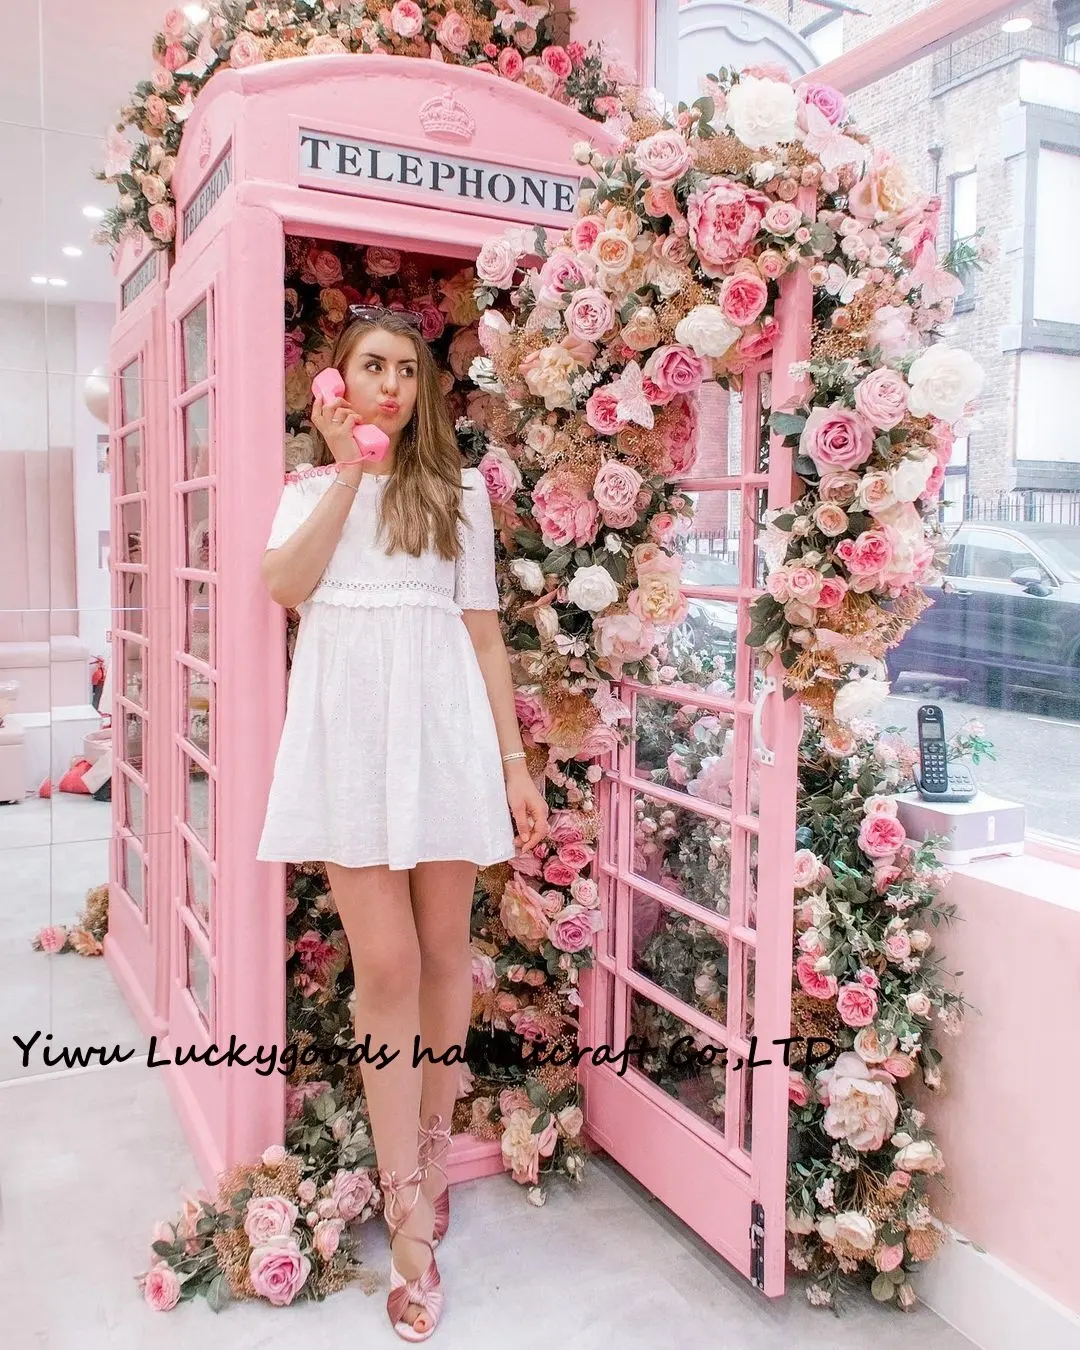 LFB1646-1 Photo Props pink telephone booth mailbox sign swinging with flowers for wedding and party stage decorations